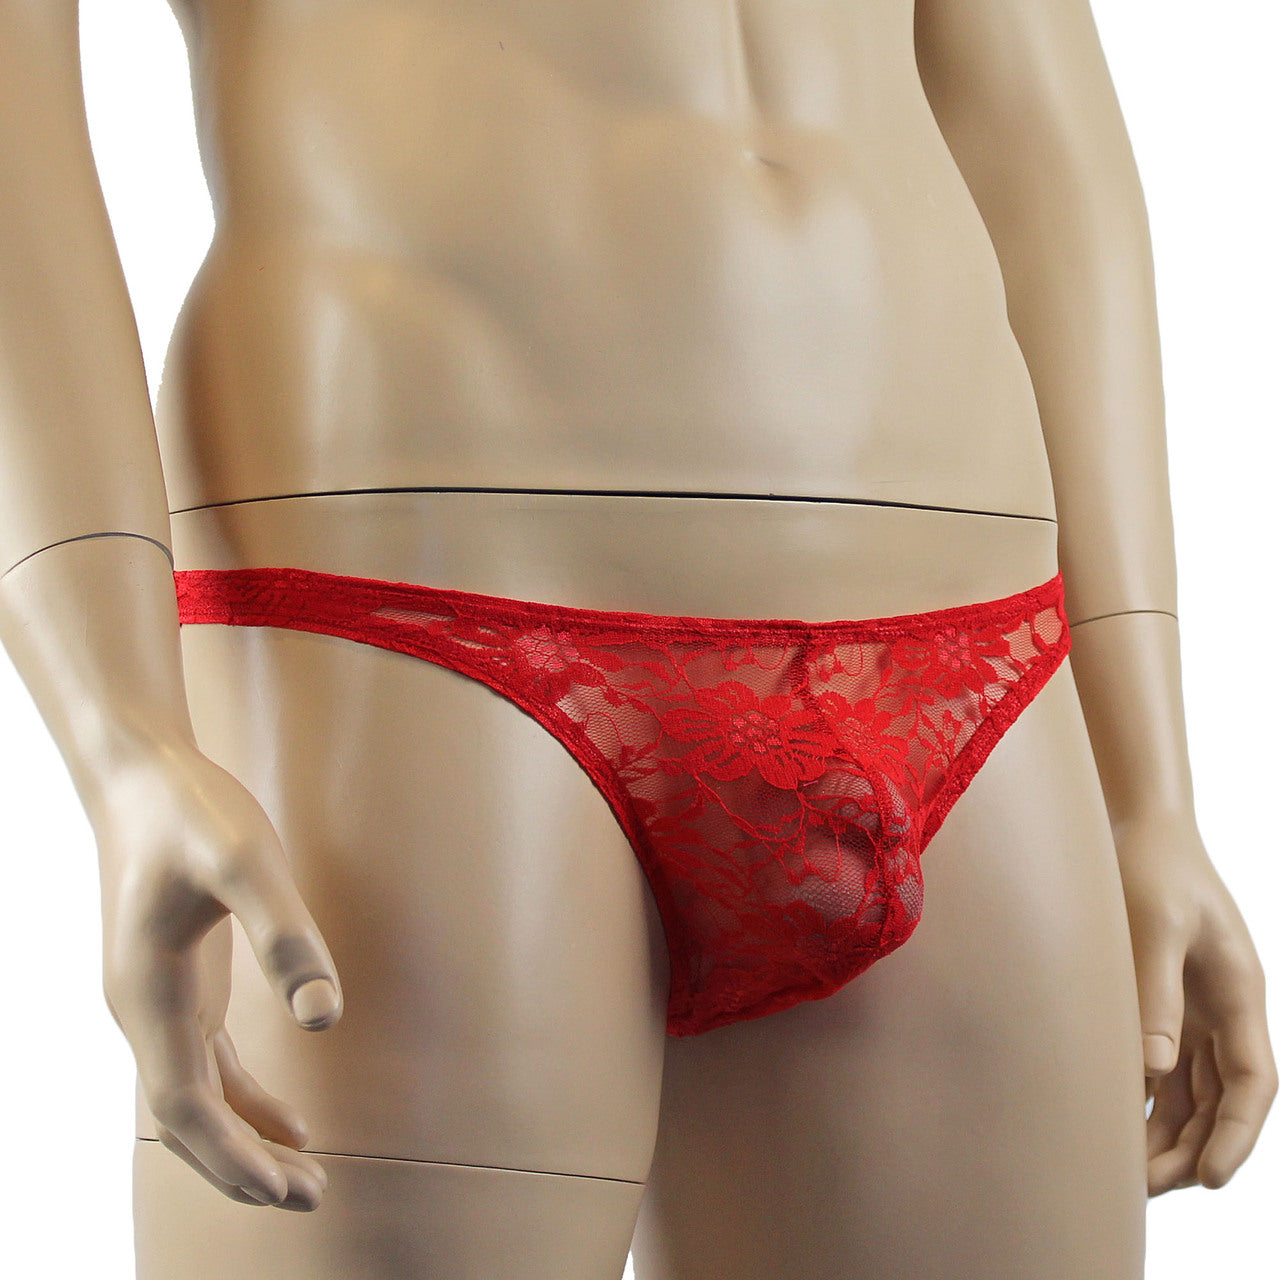 Mens Sexy Lingerie Lace Thong G string Red